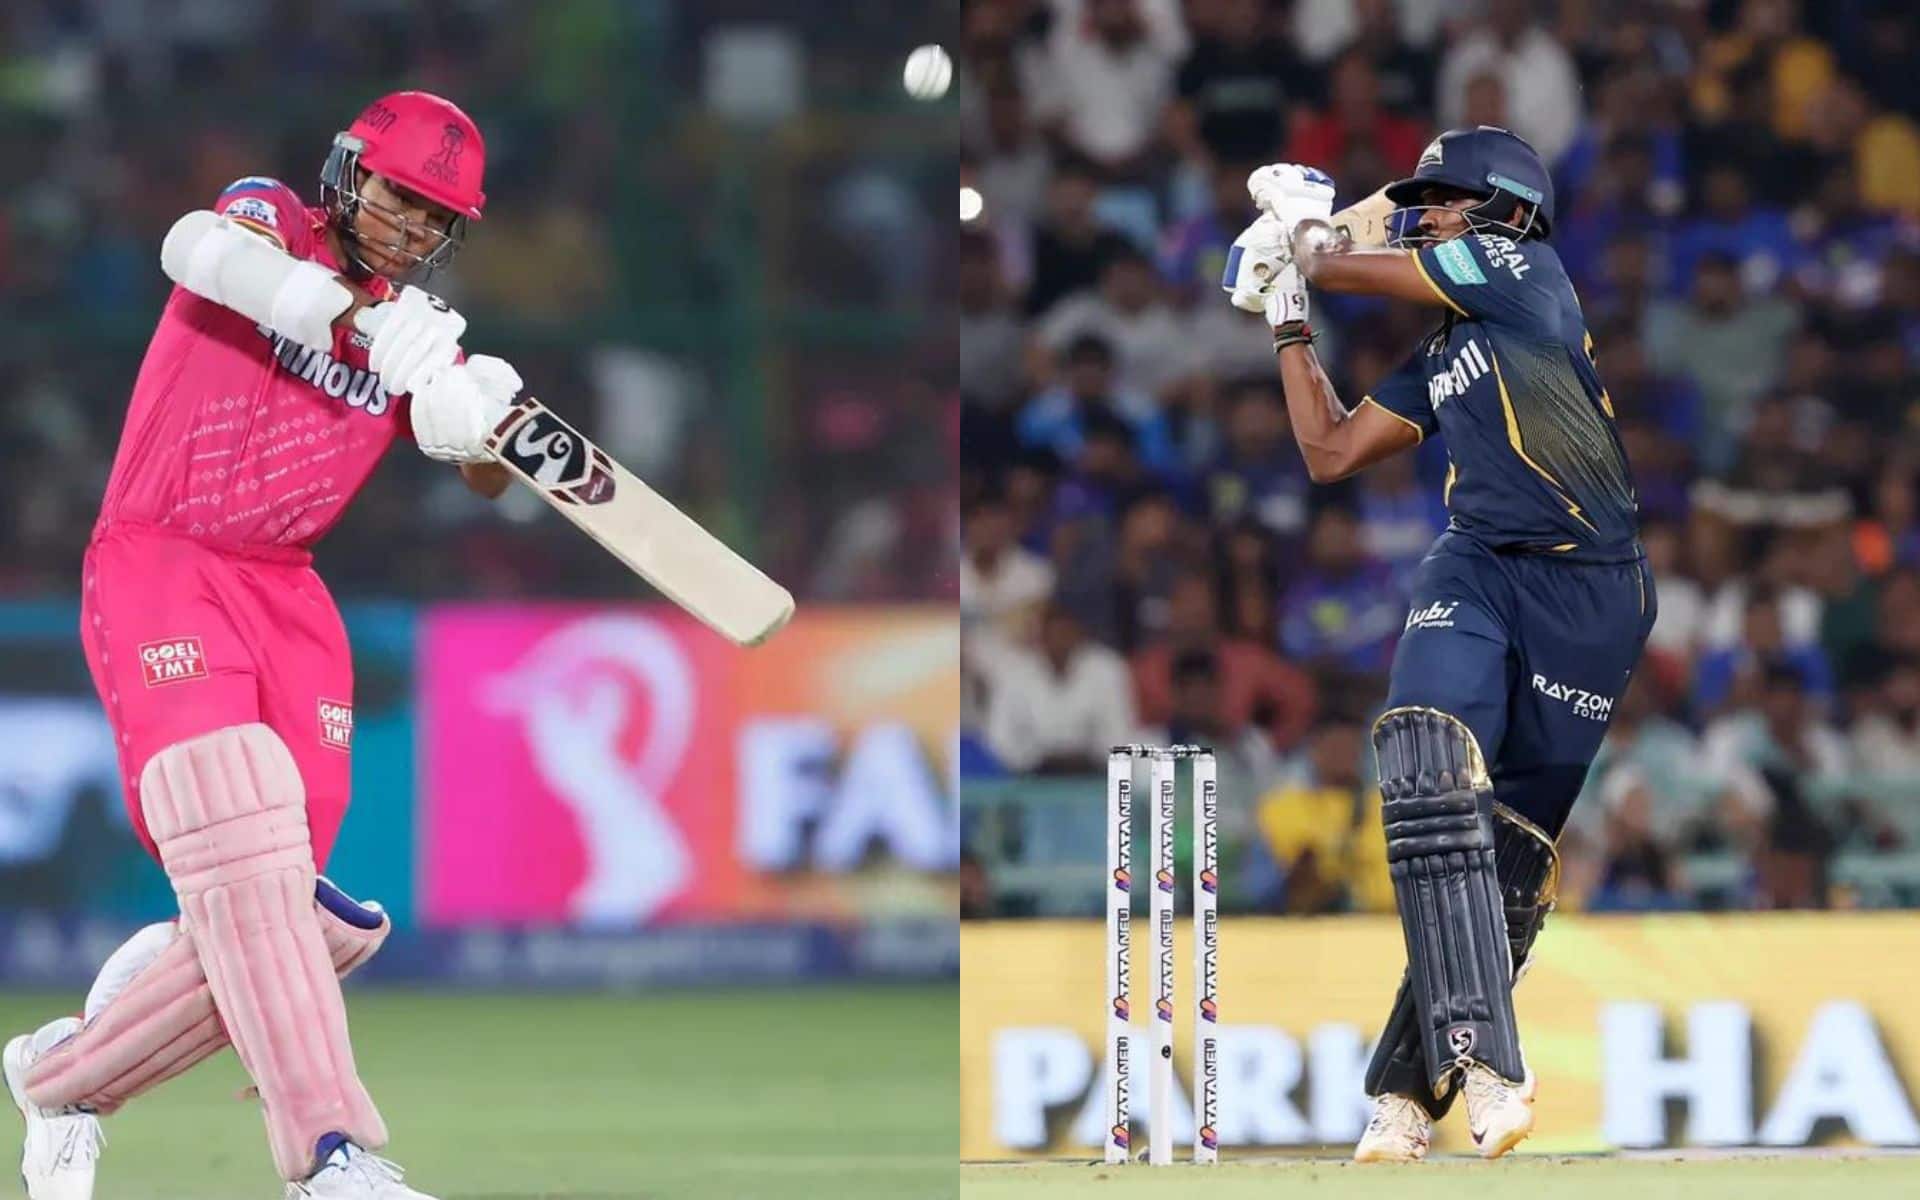 Yashasvi Jaiswal and B Sai Sudharsan will be important for their teams in the match [iplt20.com]